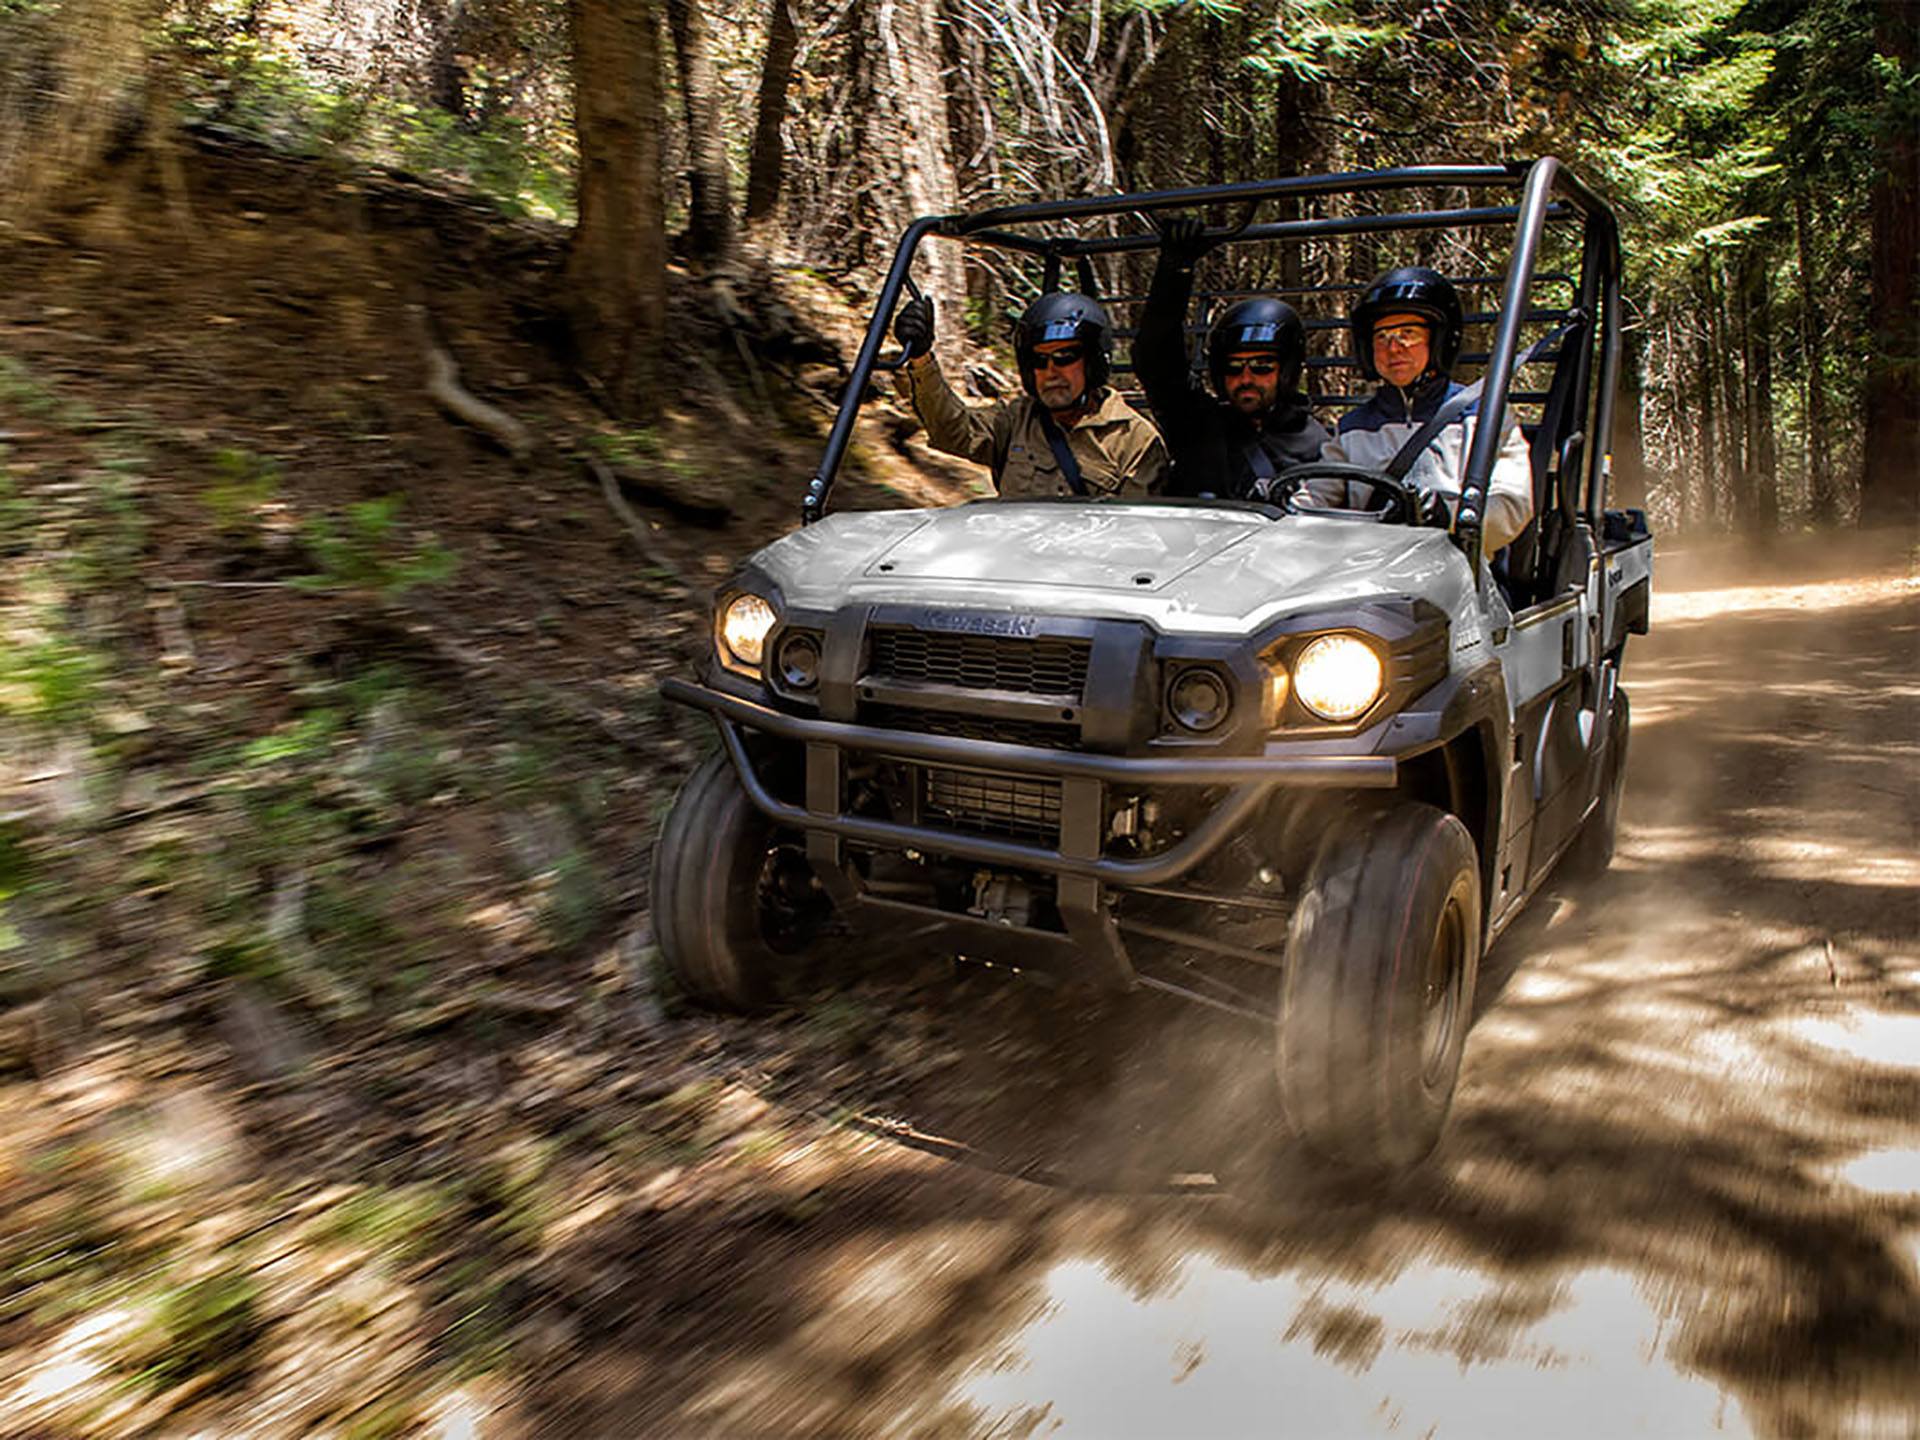 2023 Kawasaki Mule PRO-FX EPS in College Station, Texas - Photo 7